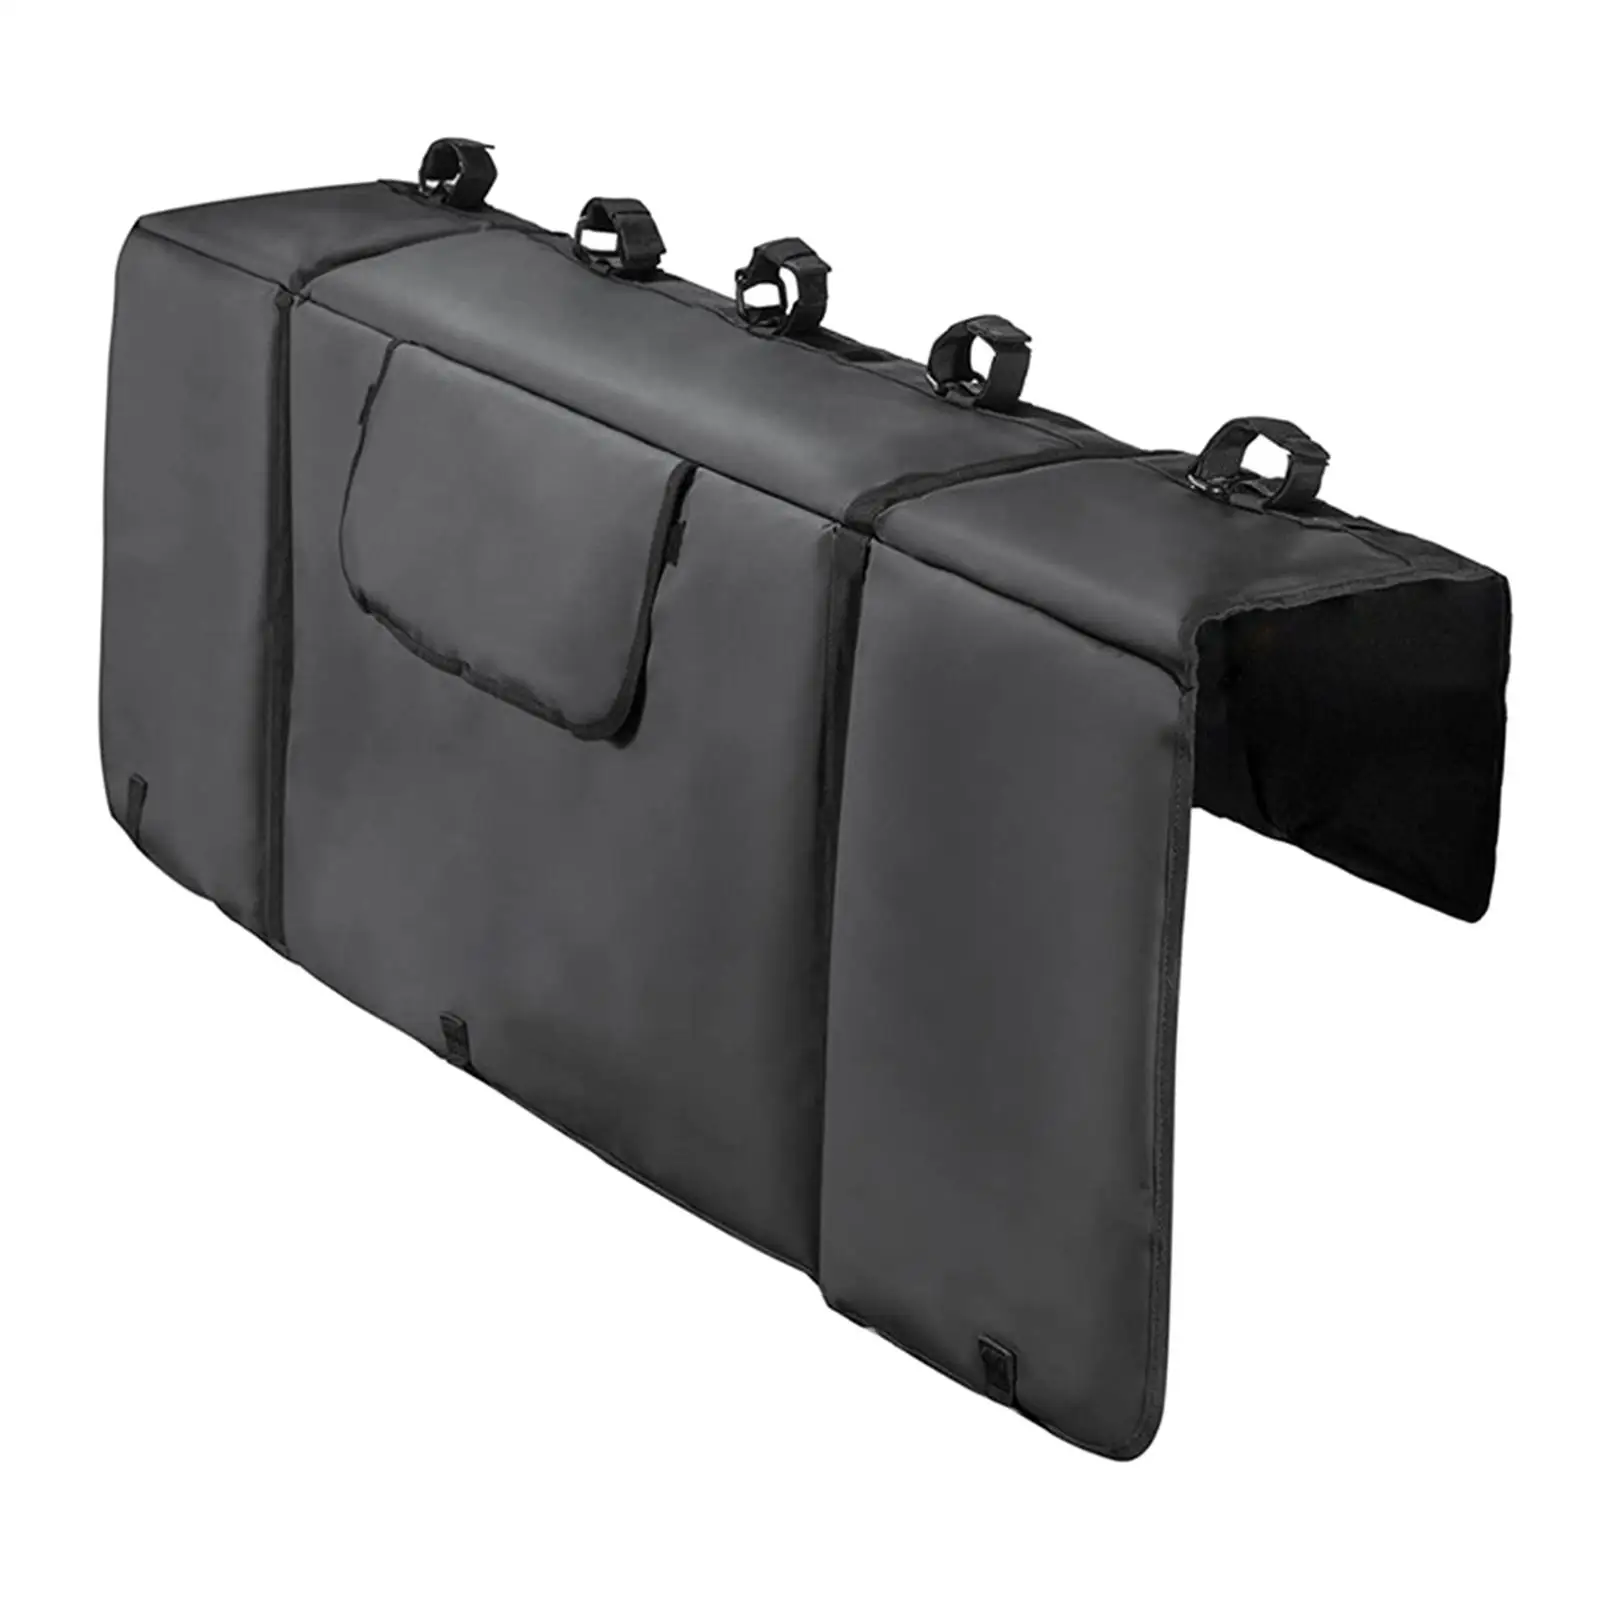 Tailgate Pad for Mountain Bikes, Tailgate Protection Pad for Most Trunks